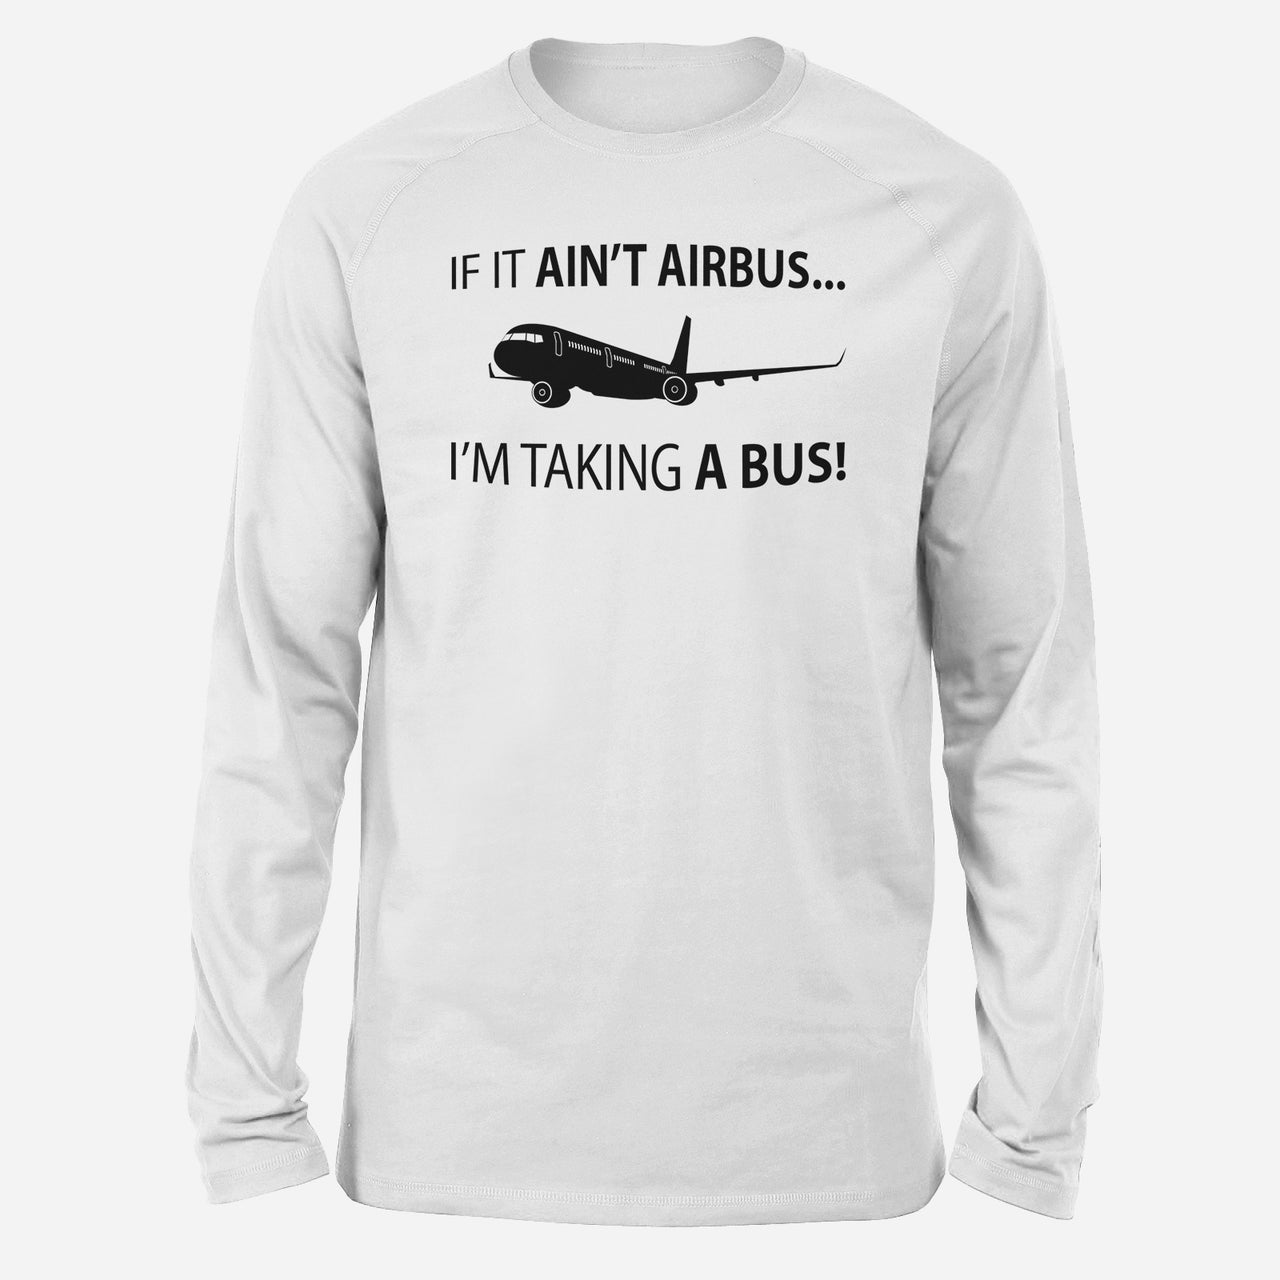 If It Ain't Airbus I'm Taking A Bus Designed Long-Sleeve T-Shirts